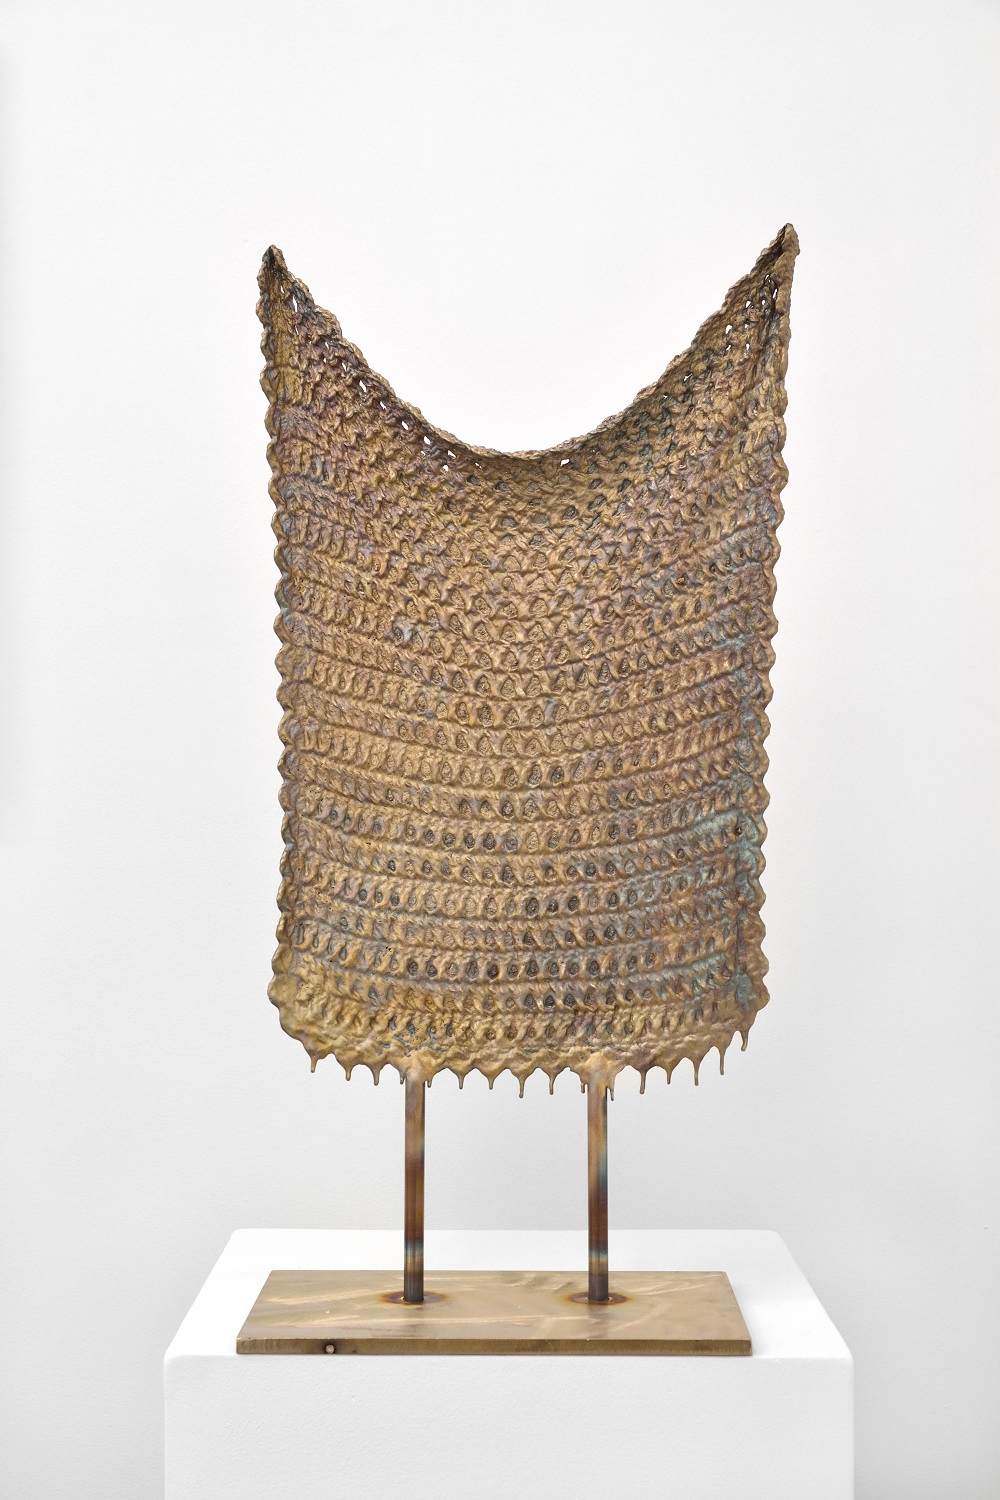 A bronze sculpture of a knitted blanket suspended between two rods on a narrow metal plinth.